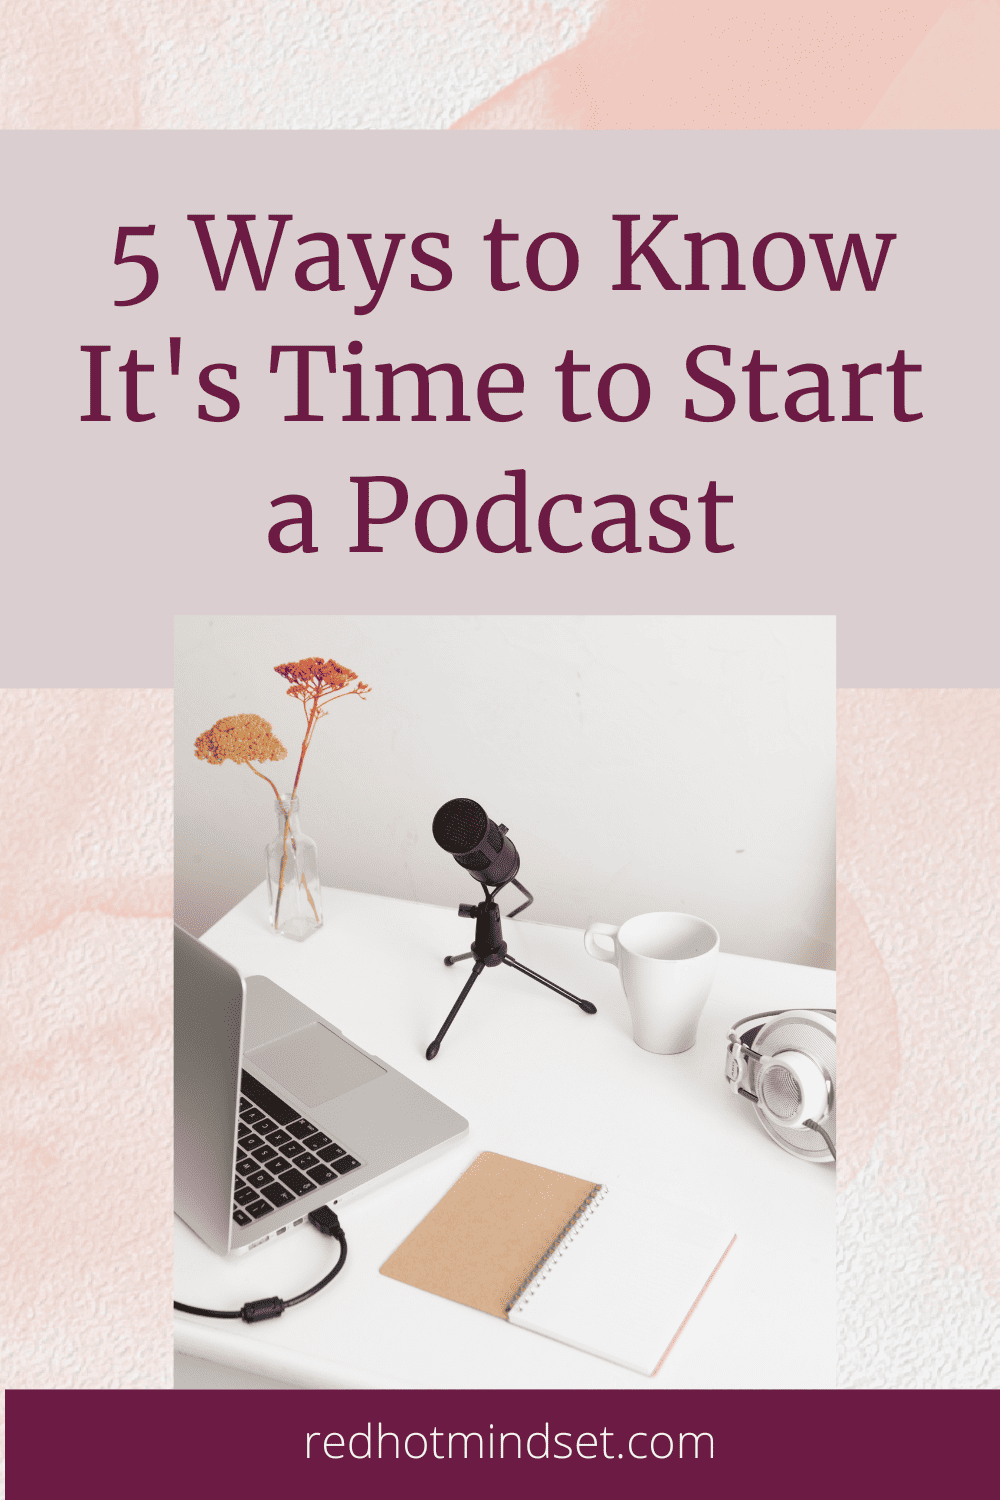 Ep 193 | 5 Ways to Know if it’s Time to Start a Podcast with Stefanie Gass